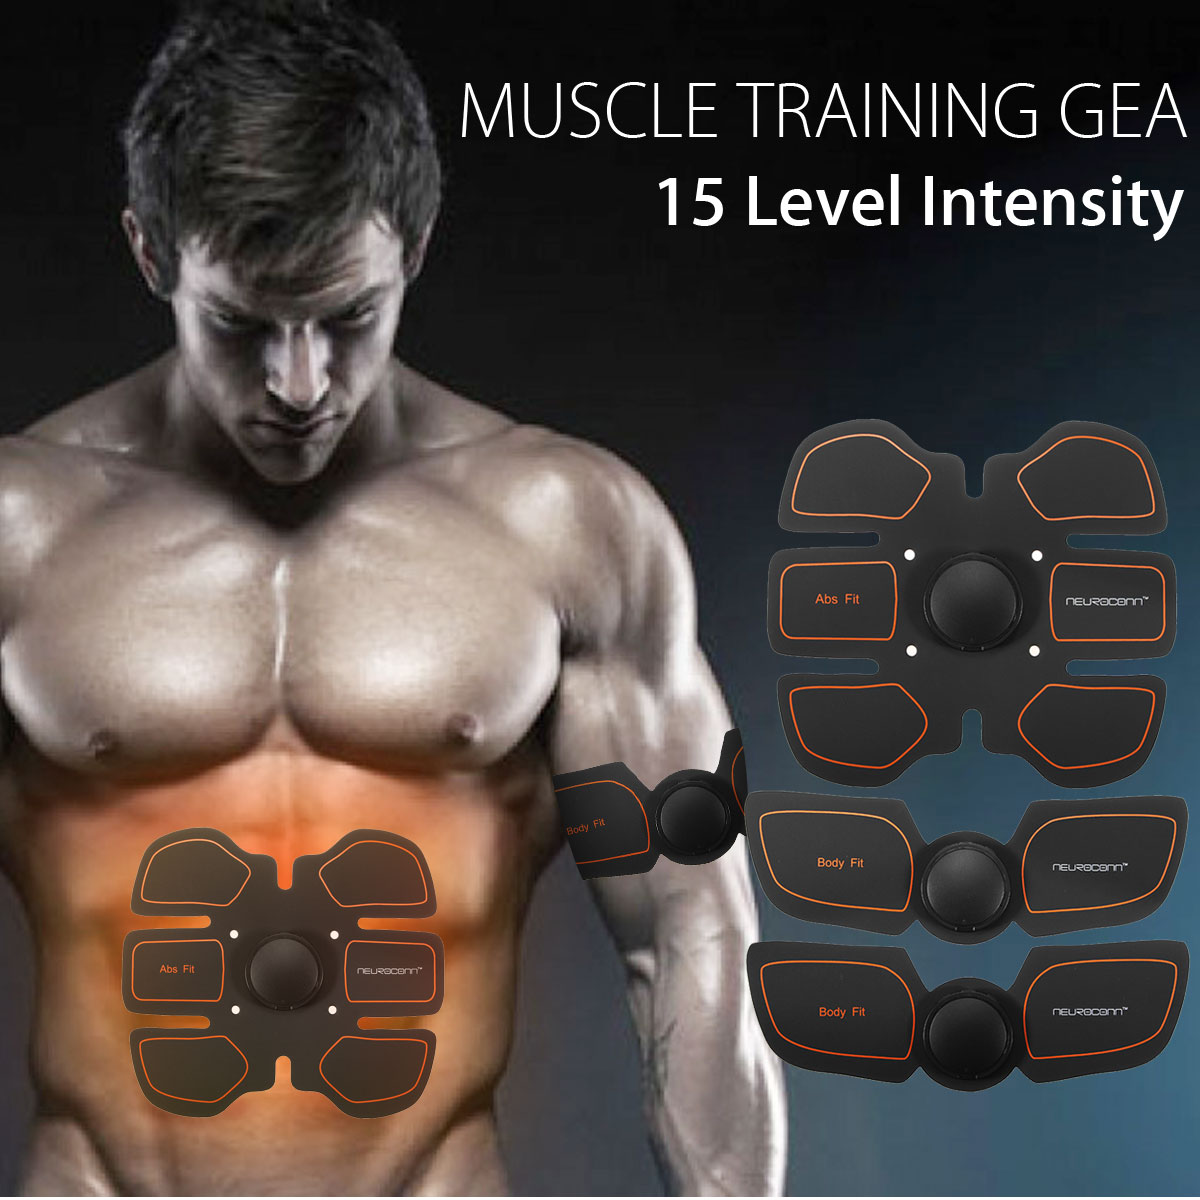 Muscle-Training-Gear-Body-Shape-Fitness-AbdomenArm-Exercise-Kit-Home-Use-Squishies-Squishy-Gel-1195311-1